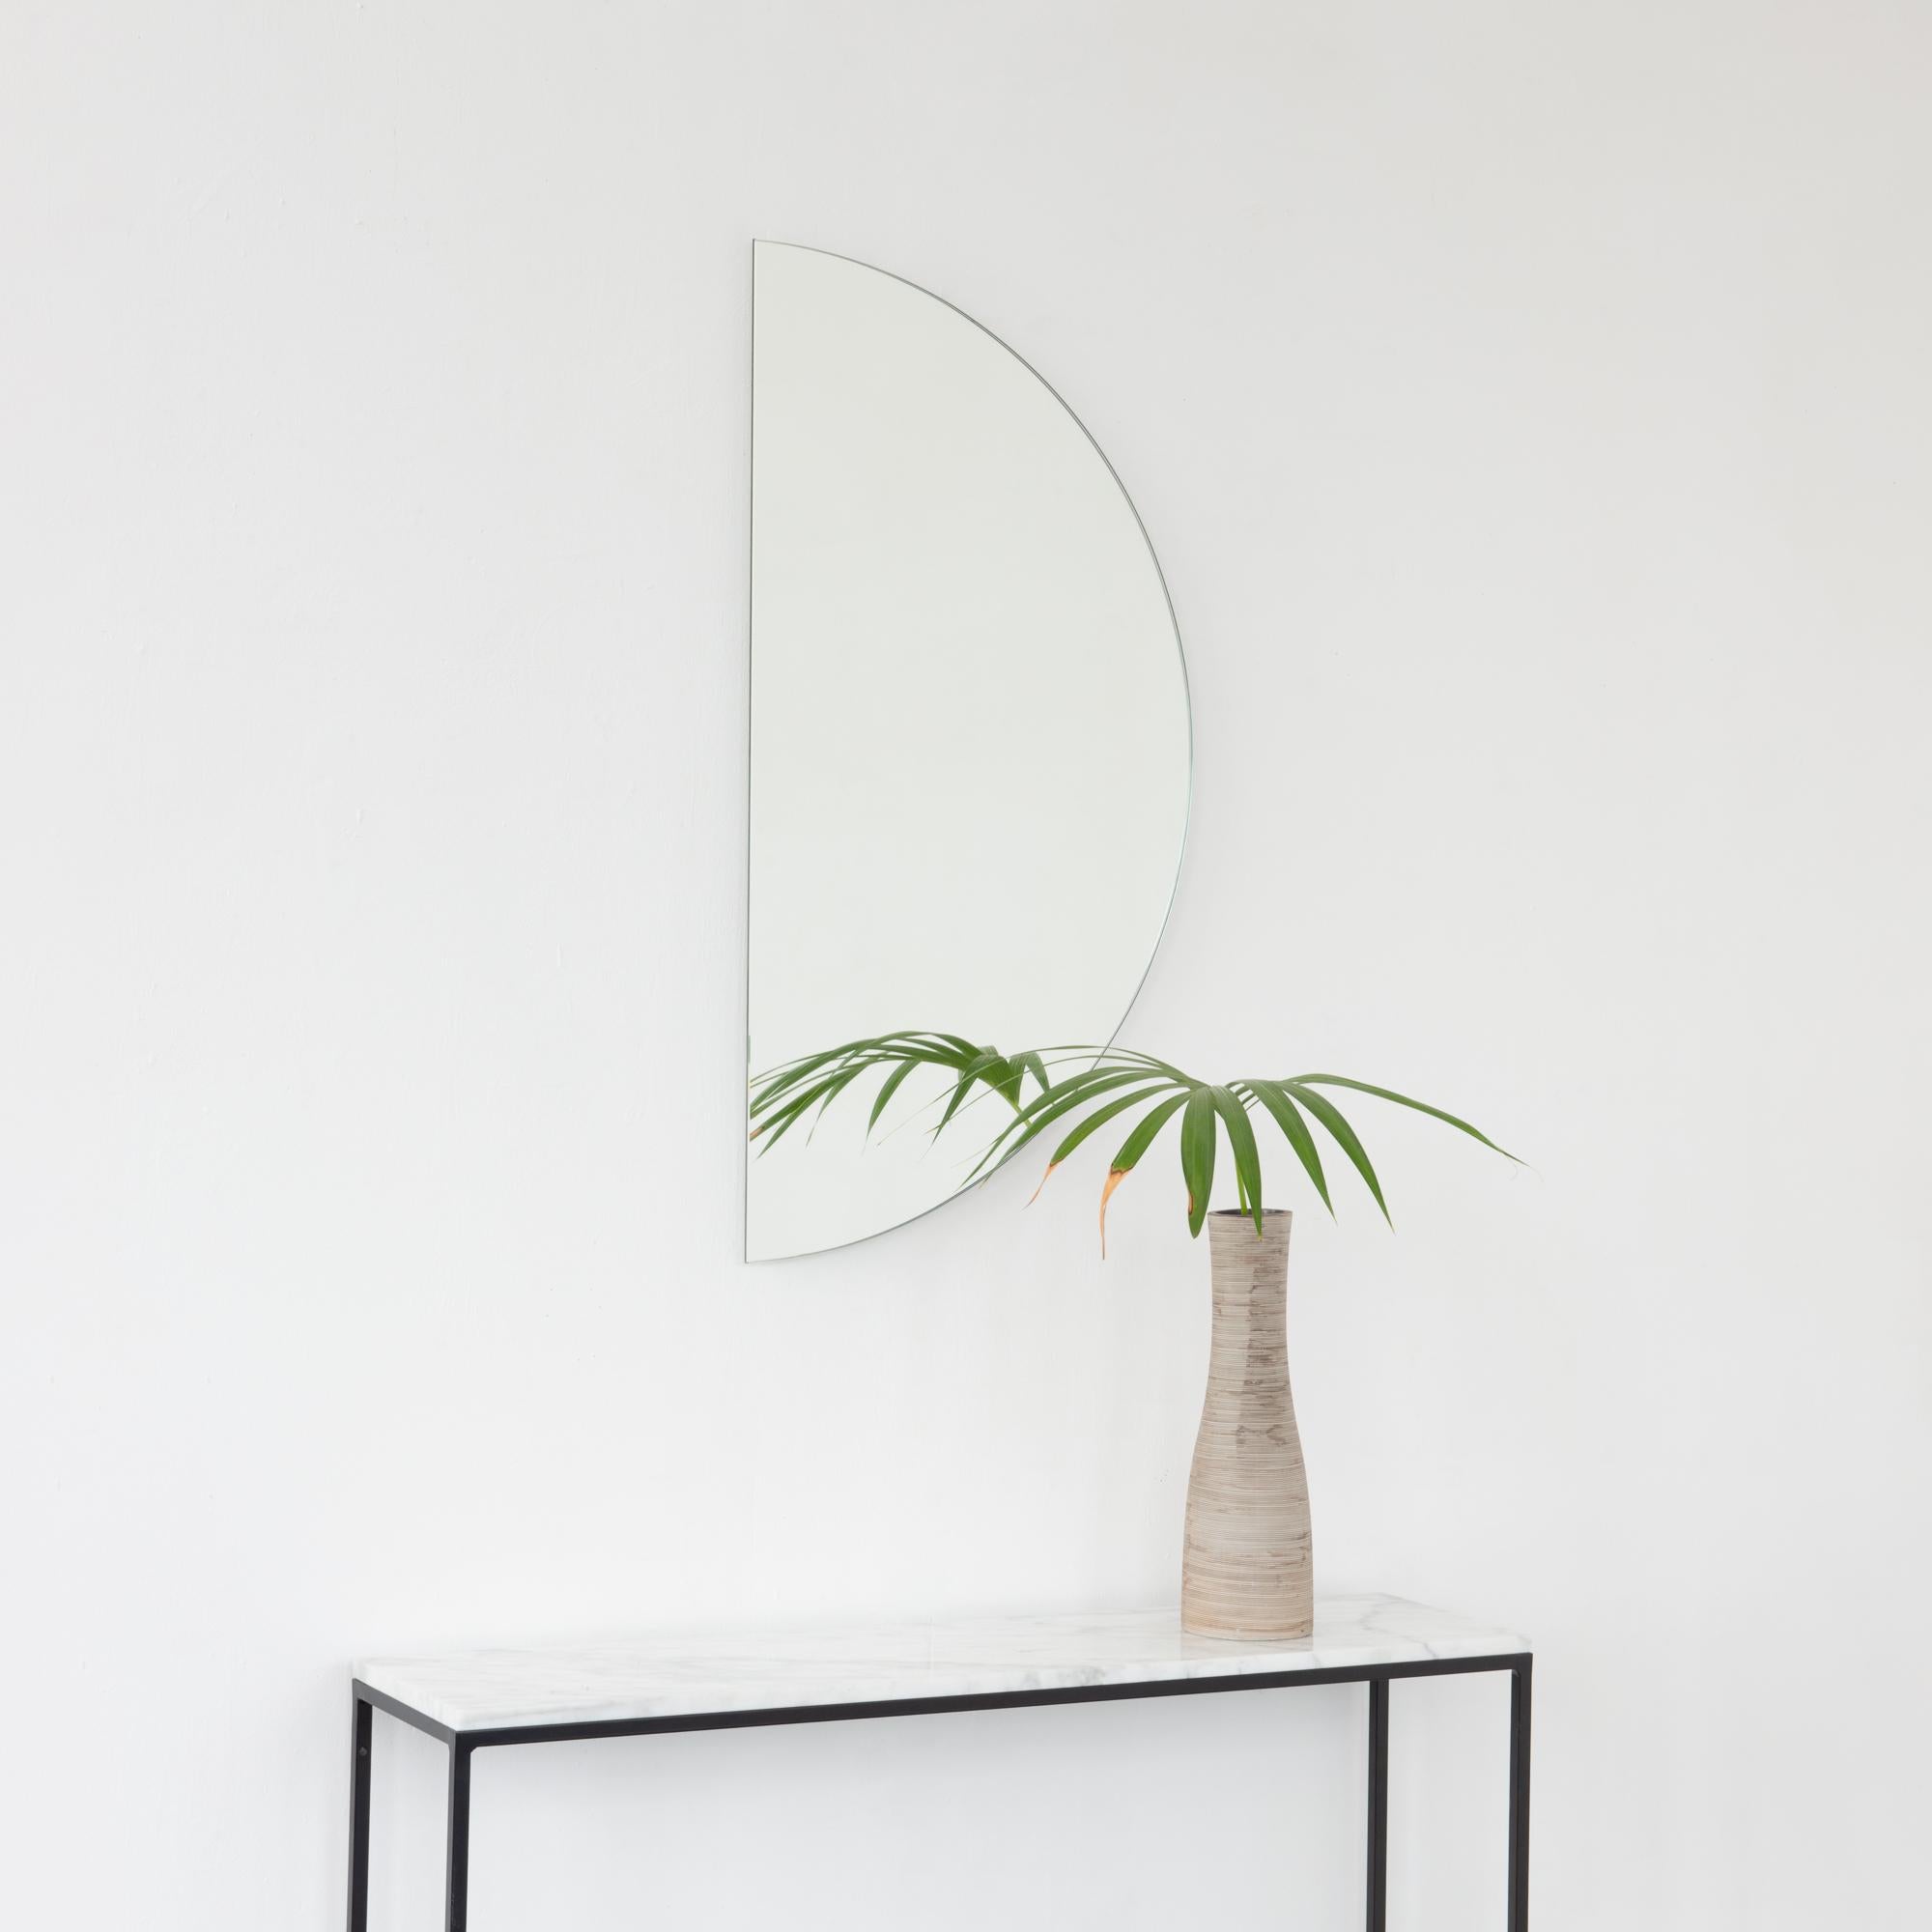 Minimalist Luna™ half-moon frameless mirror with a floating effect. Fitted with a quality and ingenious hanging system for a flexible installation in 4 different directions. Designed and made in London, UK.

Our mirrors are designed with an